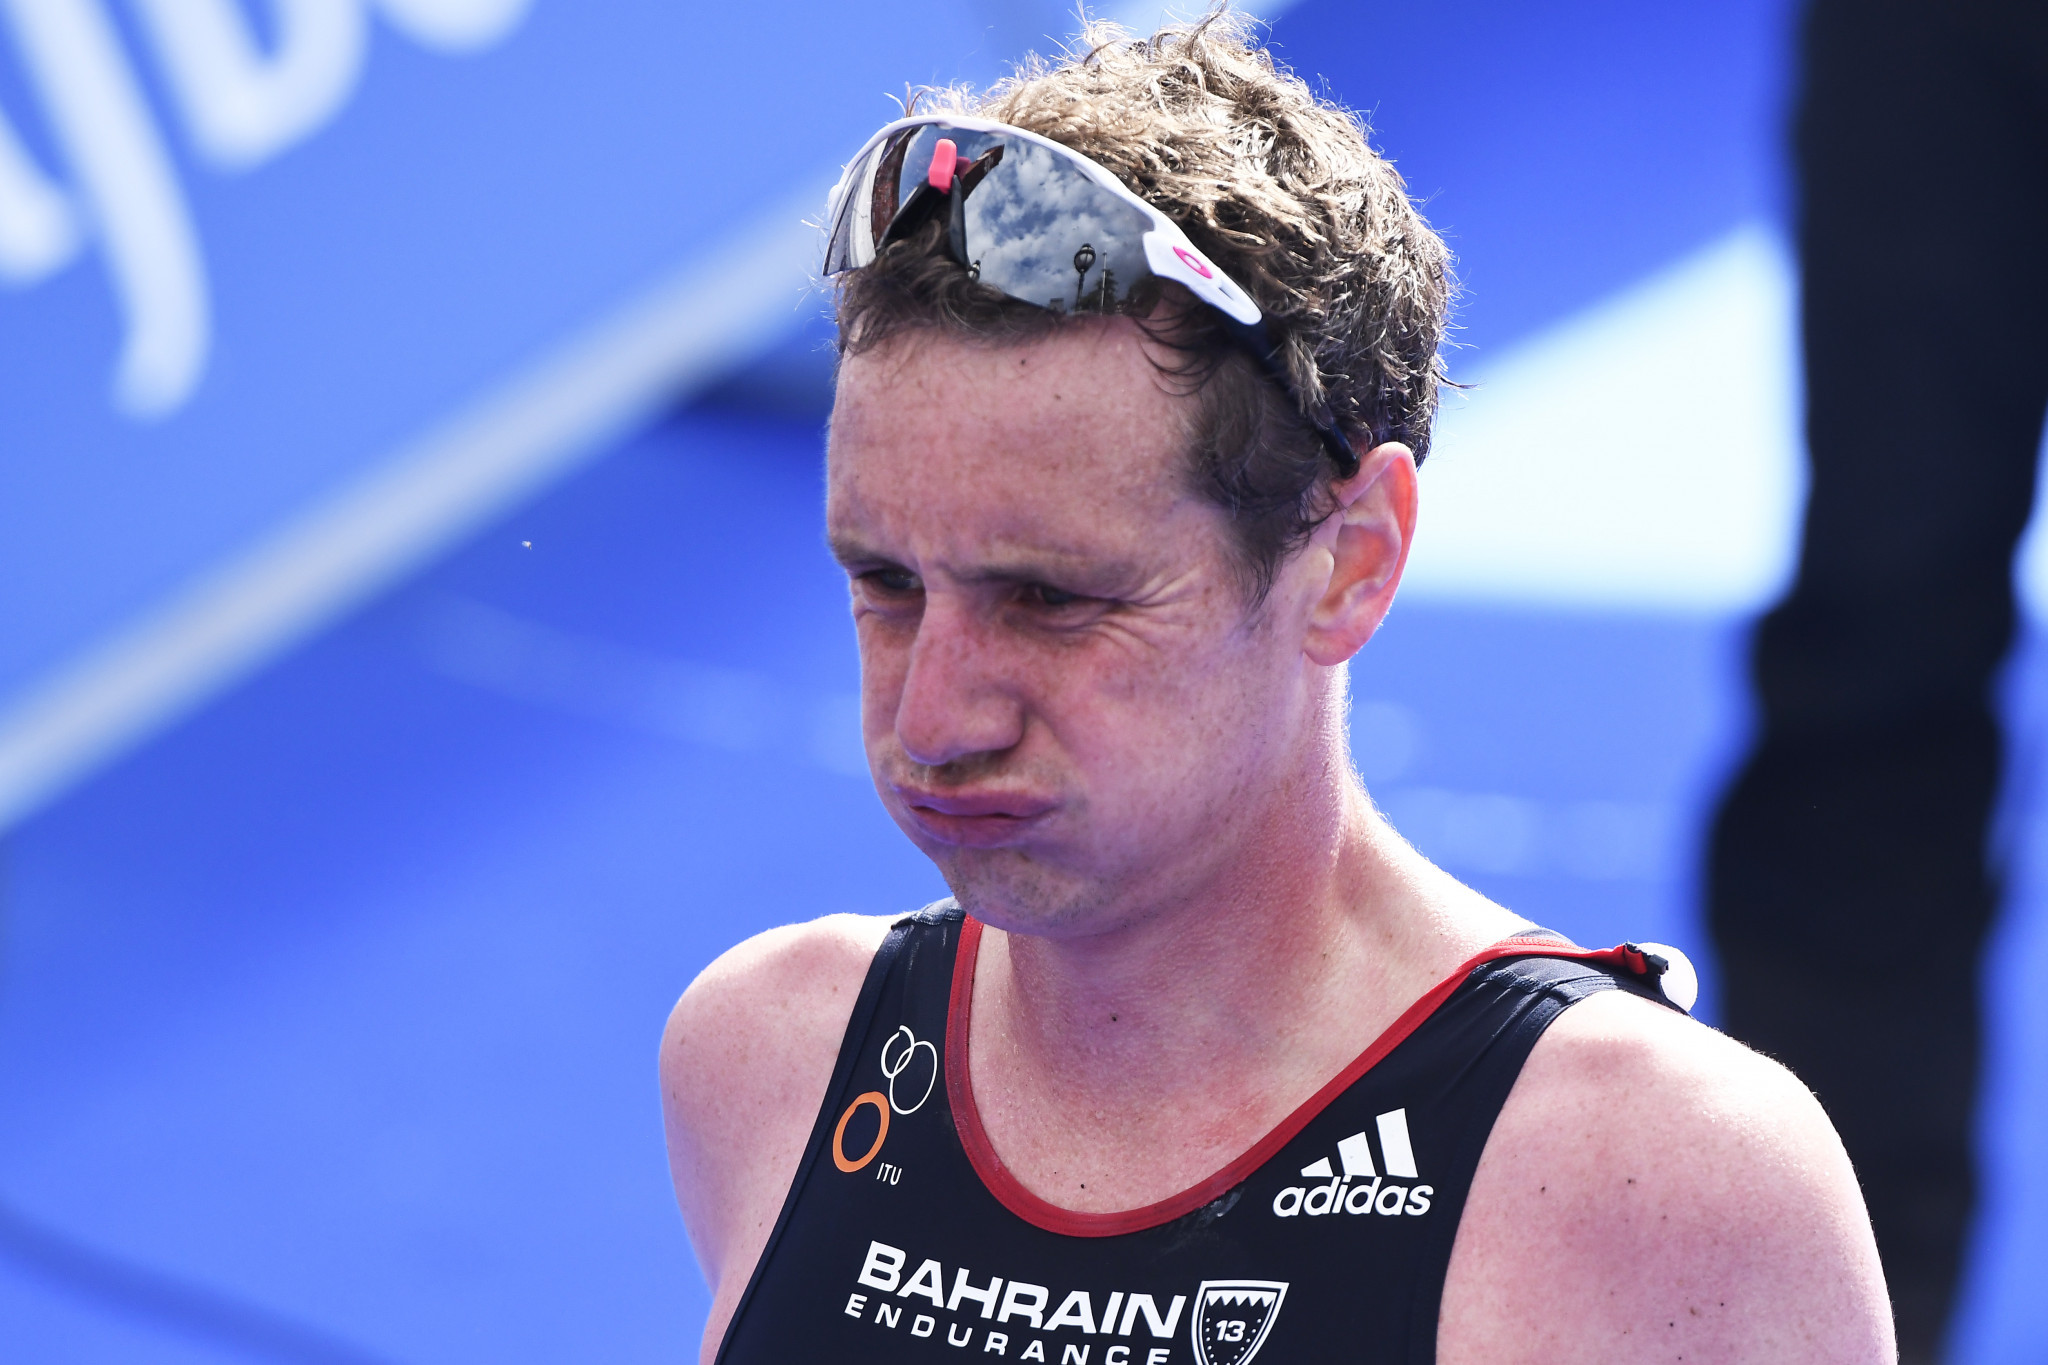 Olympic champion Brownlee to return at Triathlon World Cup in Sardinia